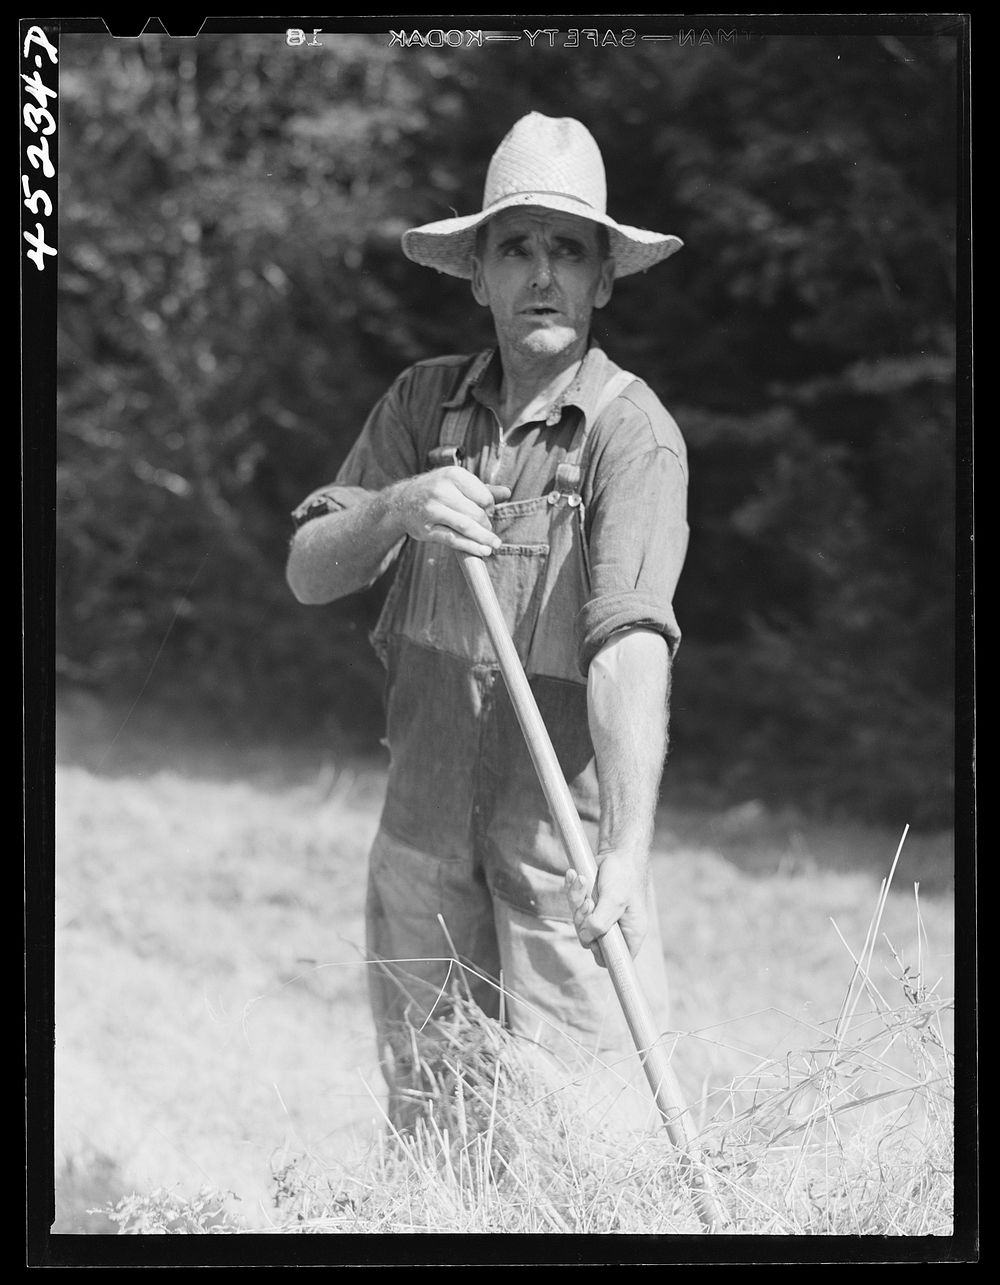 Mr. Silas Butson, FSA (Farm Security Administration) client near Athens, Vermont. Sourced from the Library of Congress.